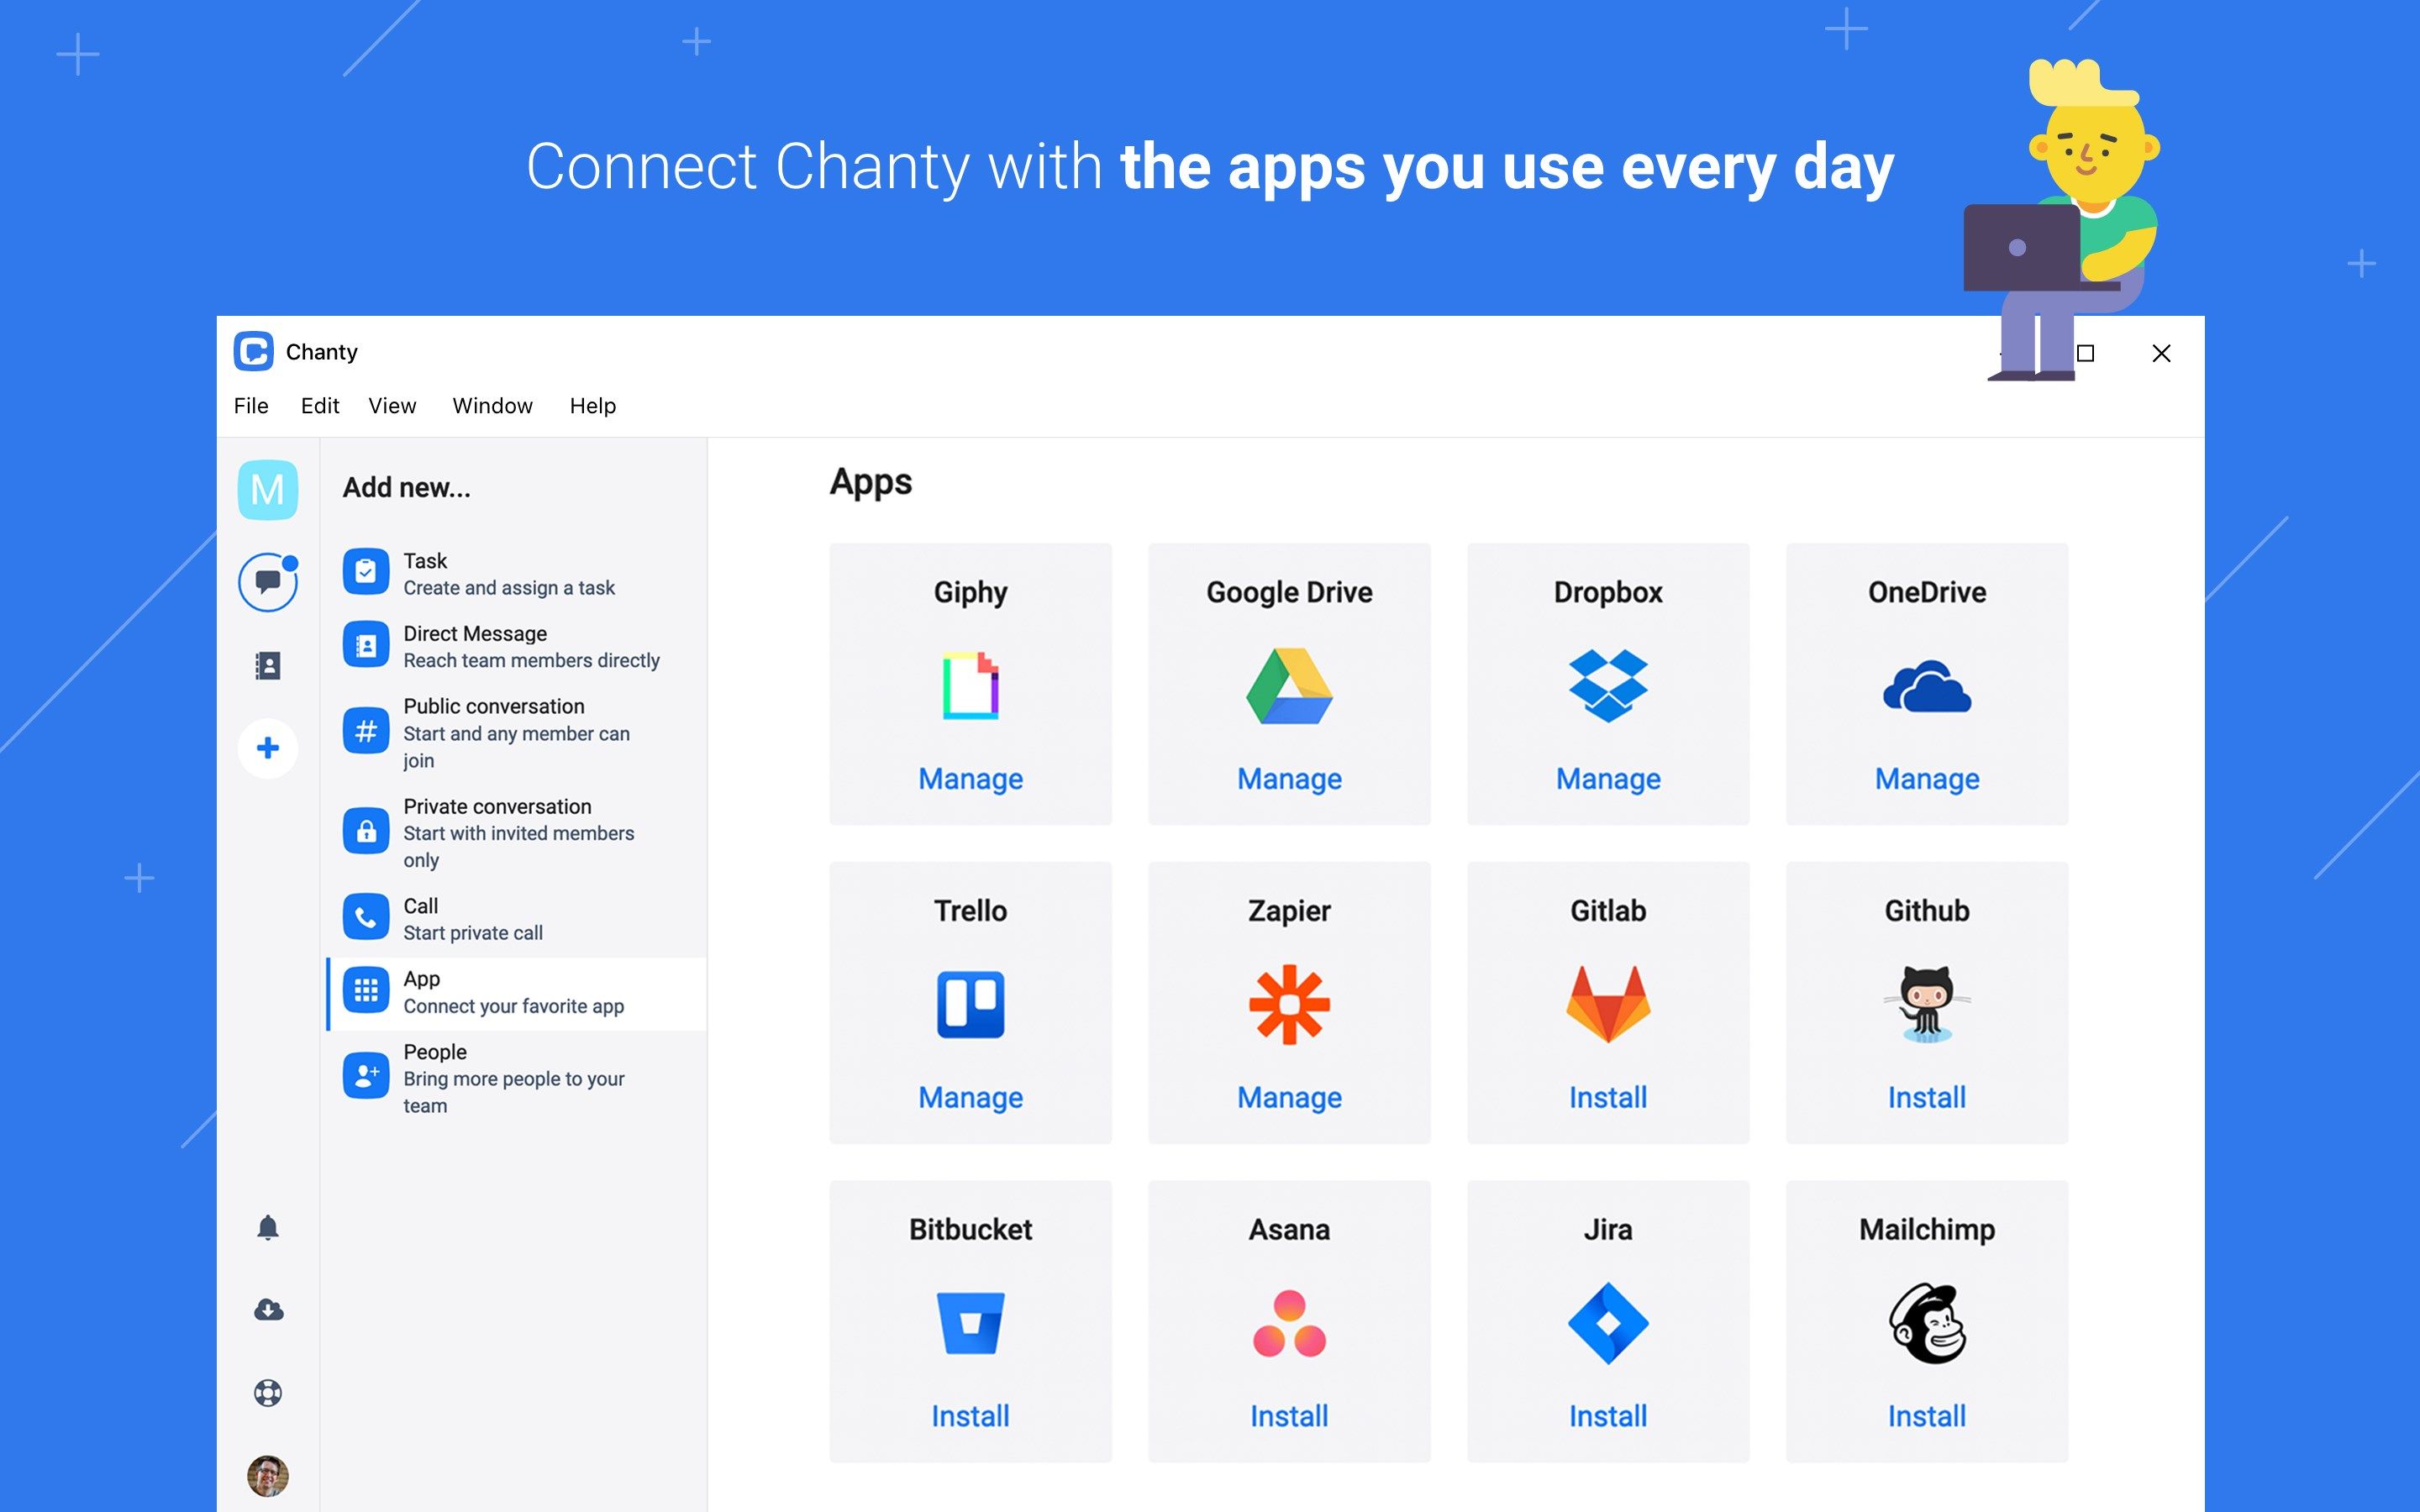 Connect Chanty with the apps you use every day